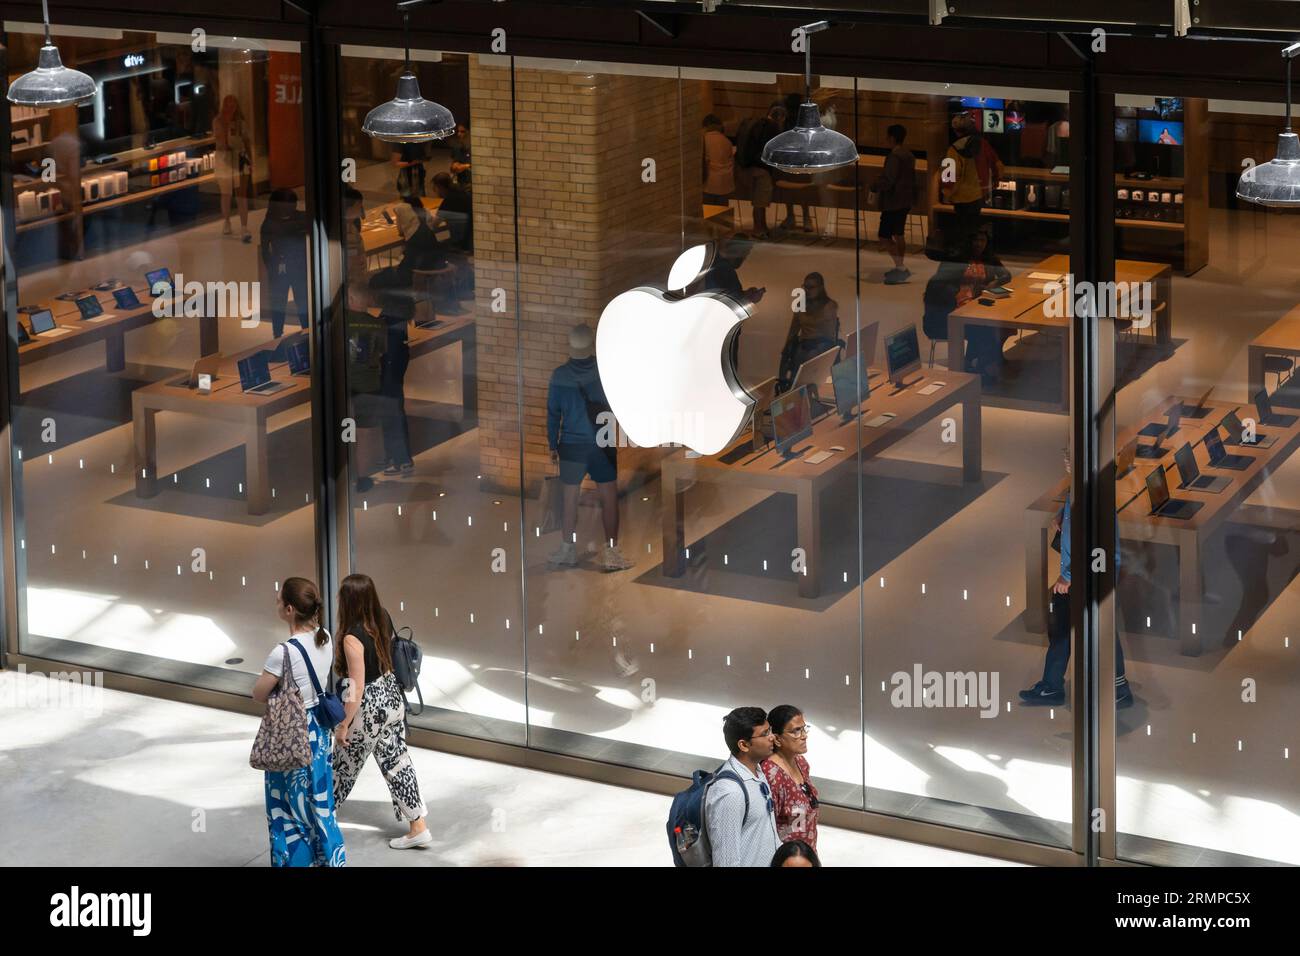 Shoppers browsing Apple products in an Apple store in the refurbished Battersea Power Station development with the Apple logo prominent. London, UK Stock Photo